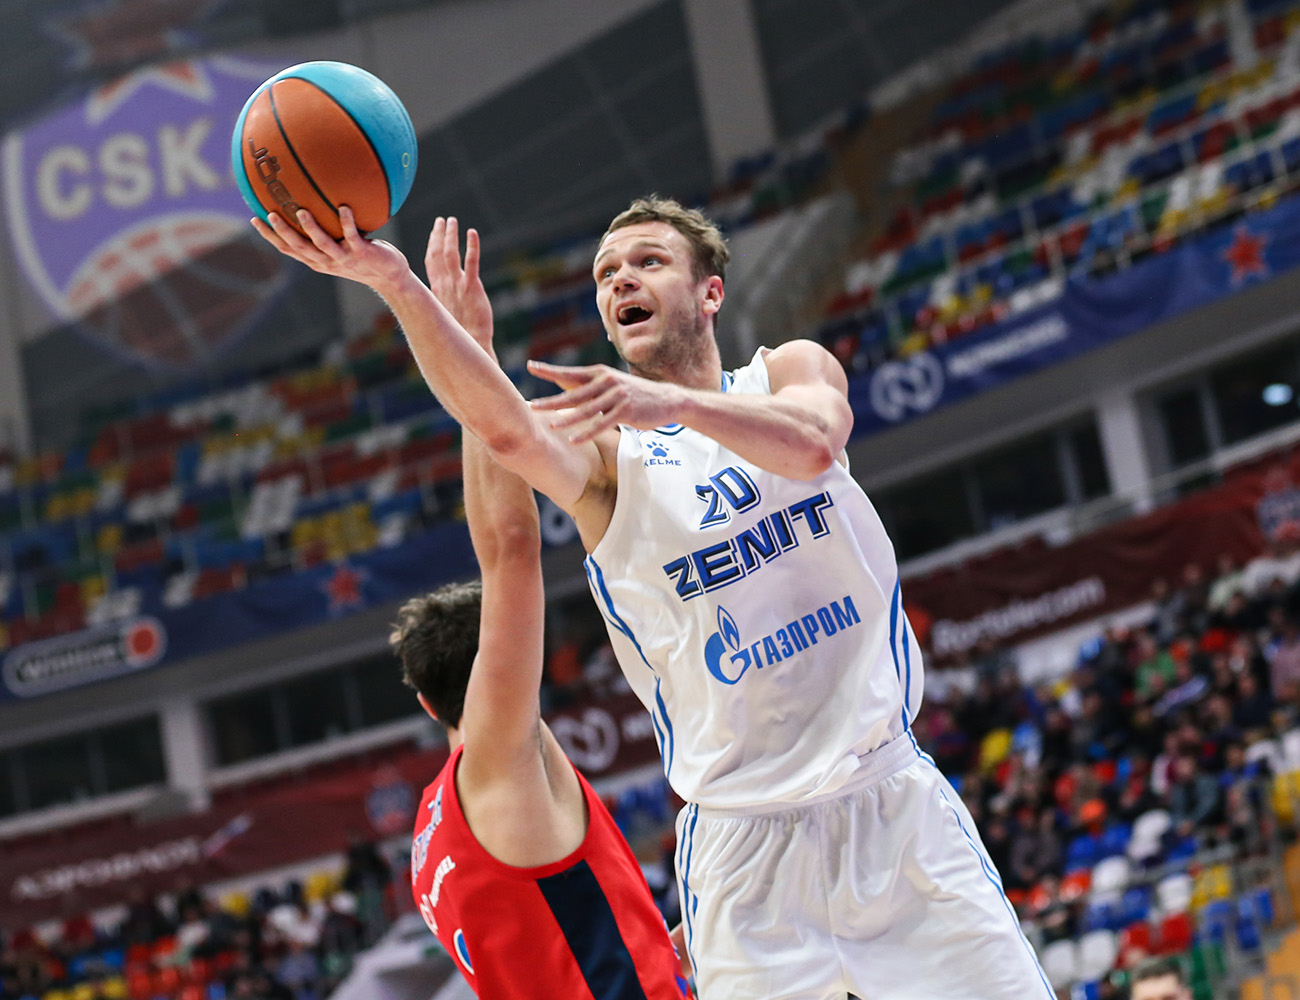 CSKA made a 21-point comeback, but let Zenit win in a tense ending